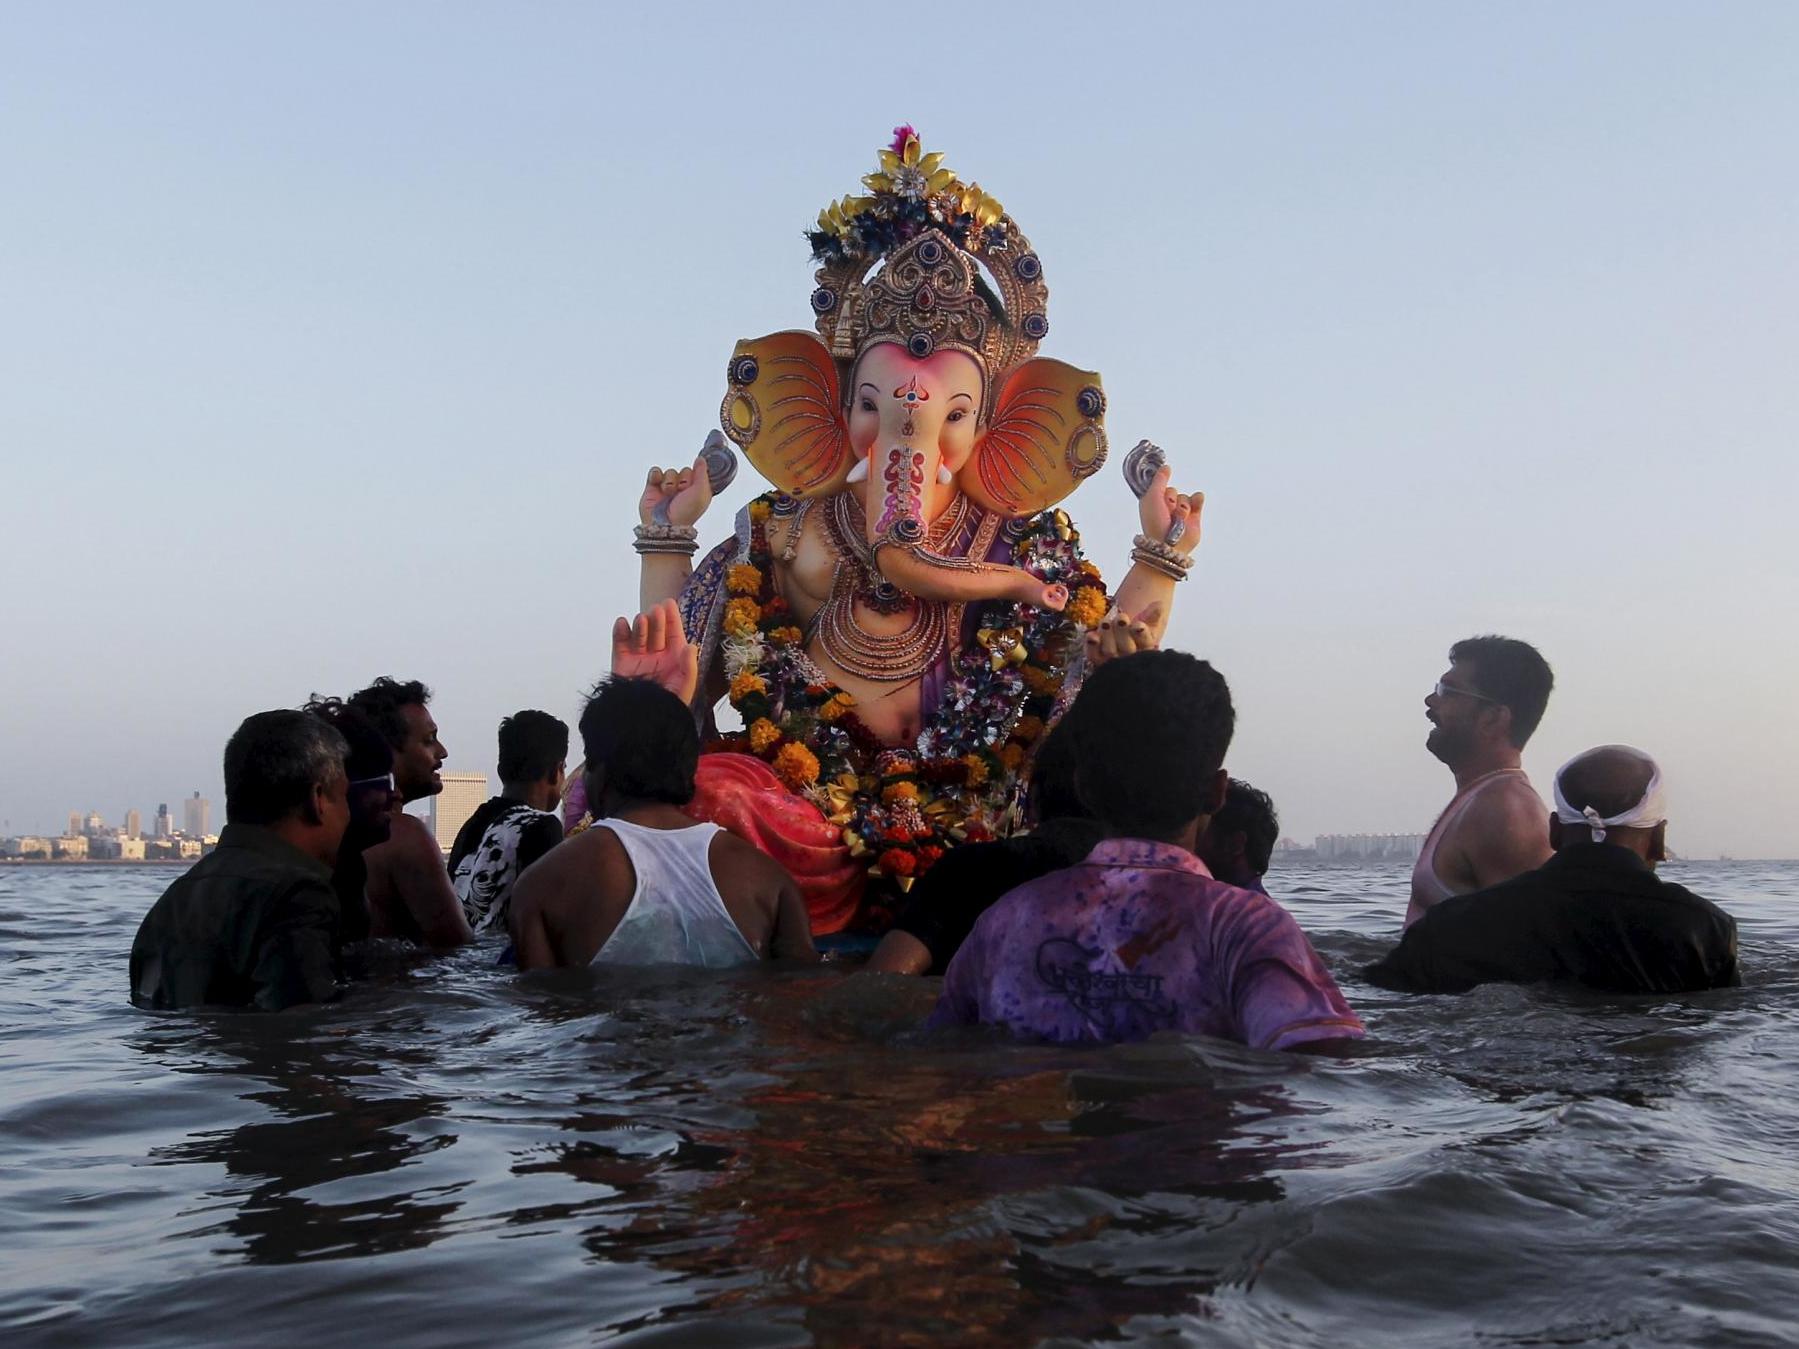 Devotees carry an idol of the Hindu elephant god Ganesha, the deity of prosperity, for immersion into the Arabian Sea on the last day of the Ganesh Chaturthi festival in Mumbai, India